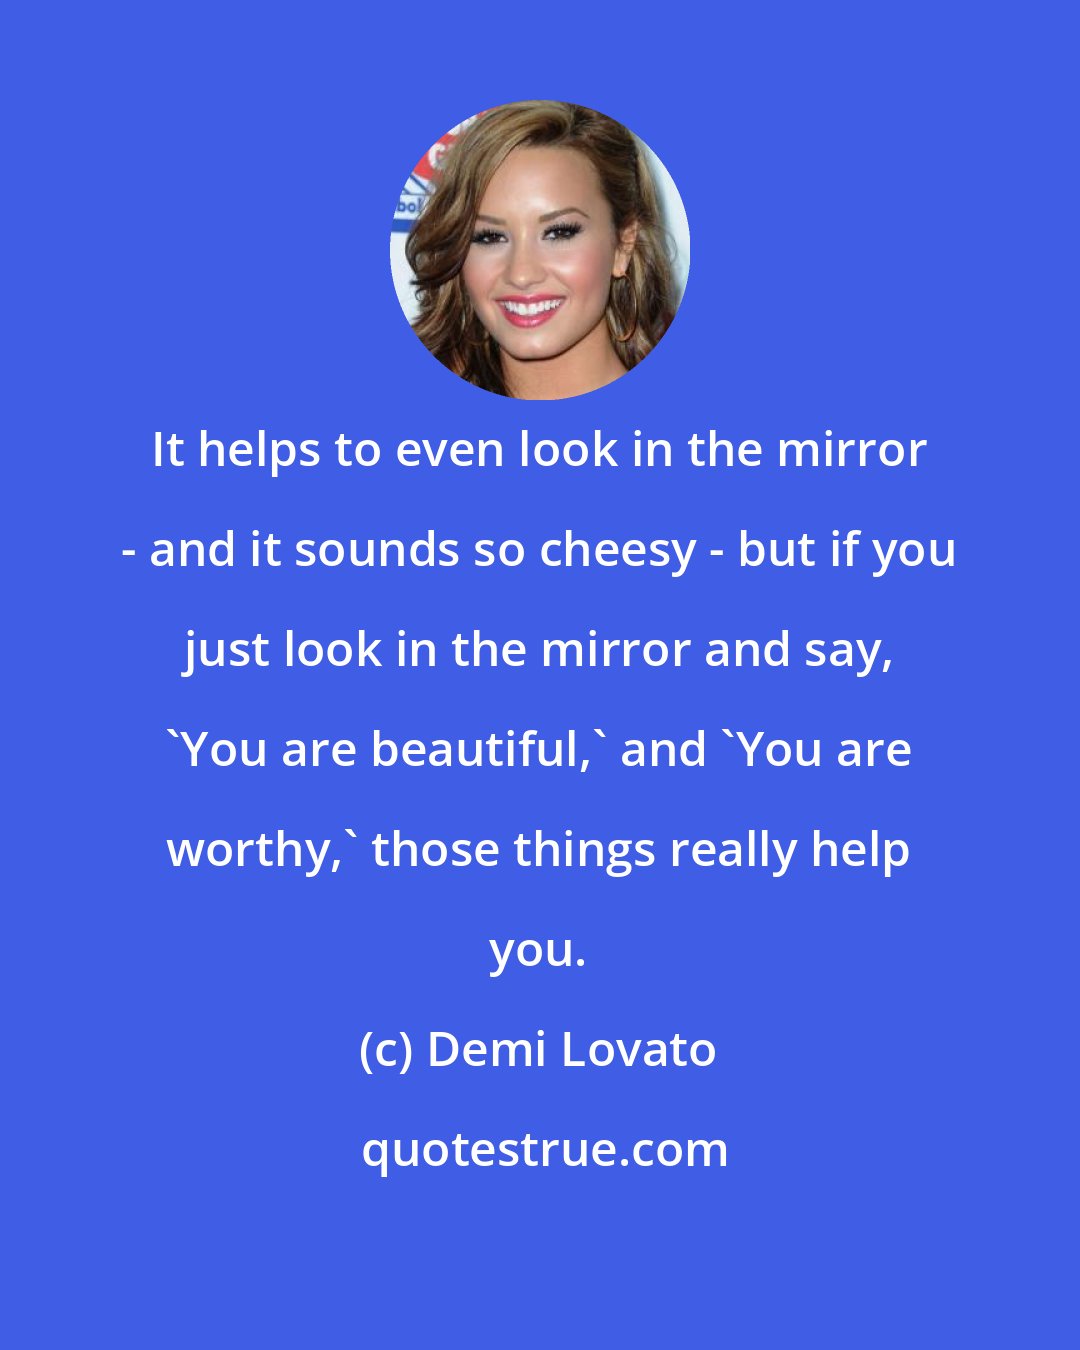 Demi Lovato: It helps to even look in the mirror - and it sounds so cheesy - but if you just look in the mirror and say, 'You are beautiful,' and 'You are worthy,' those things really help you.